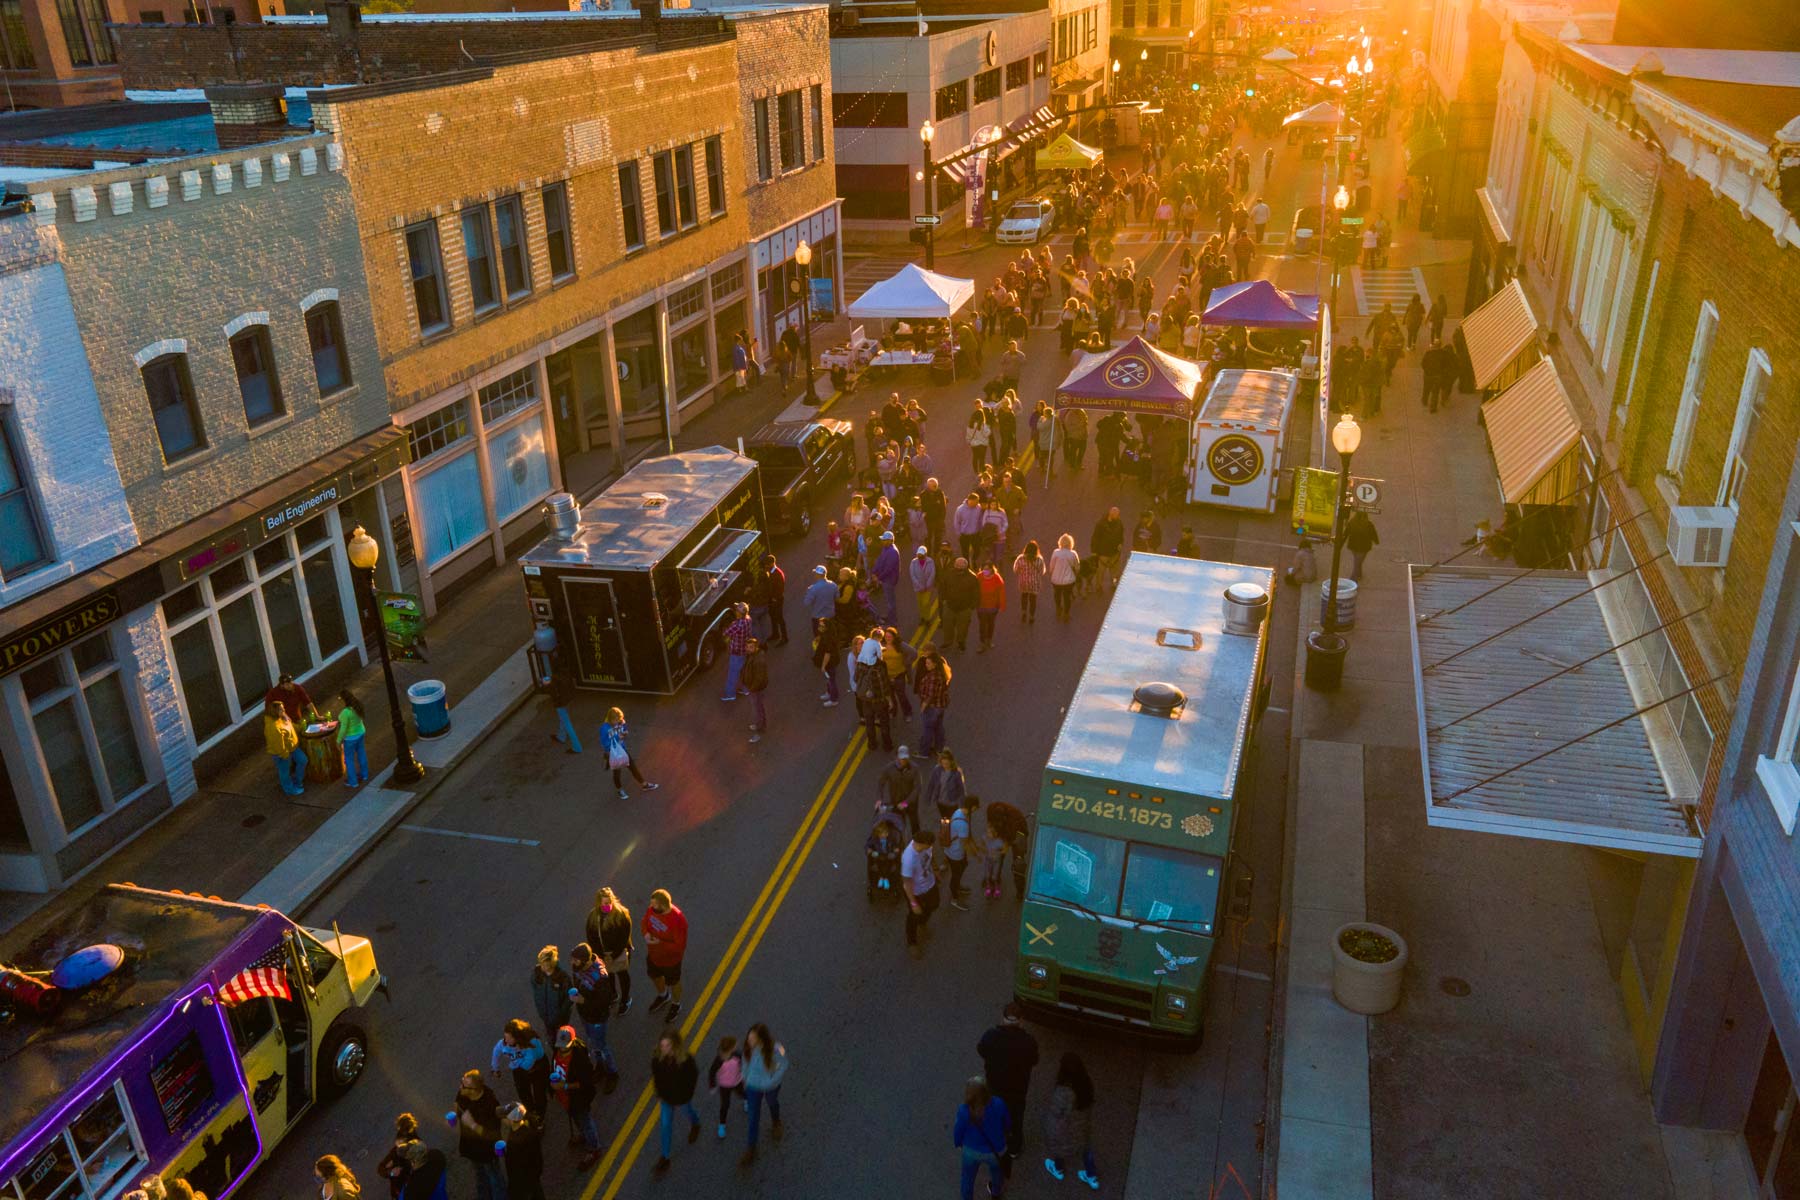 Street view of people and food trucks at sunset.